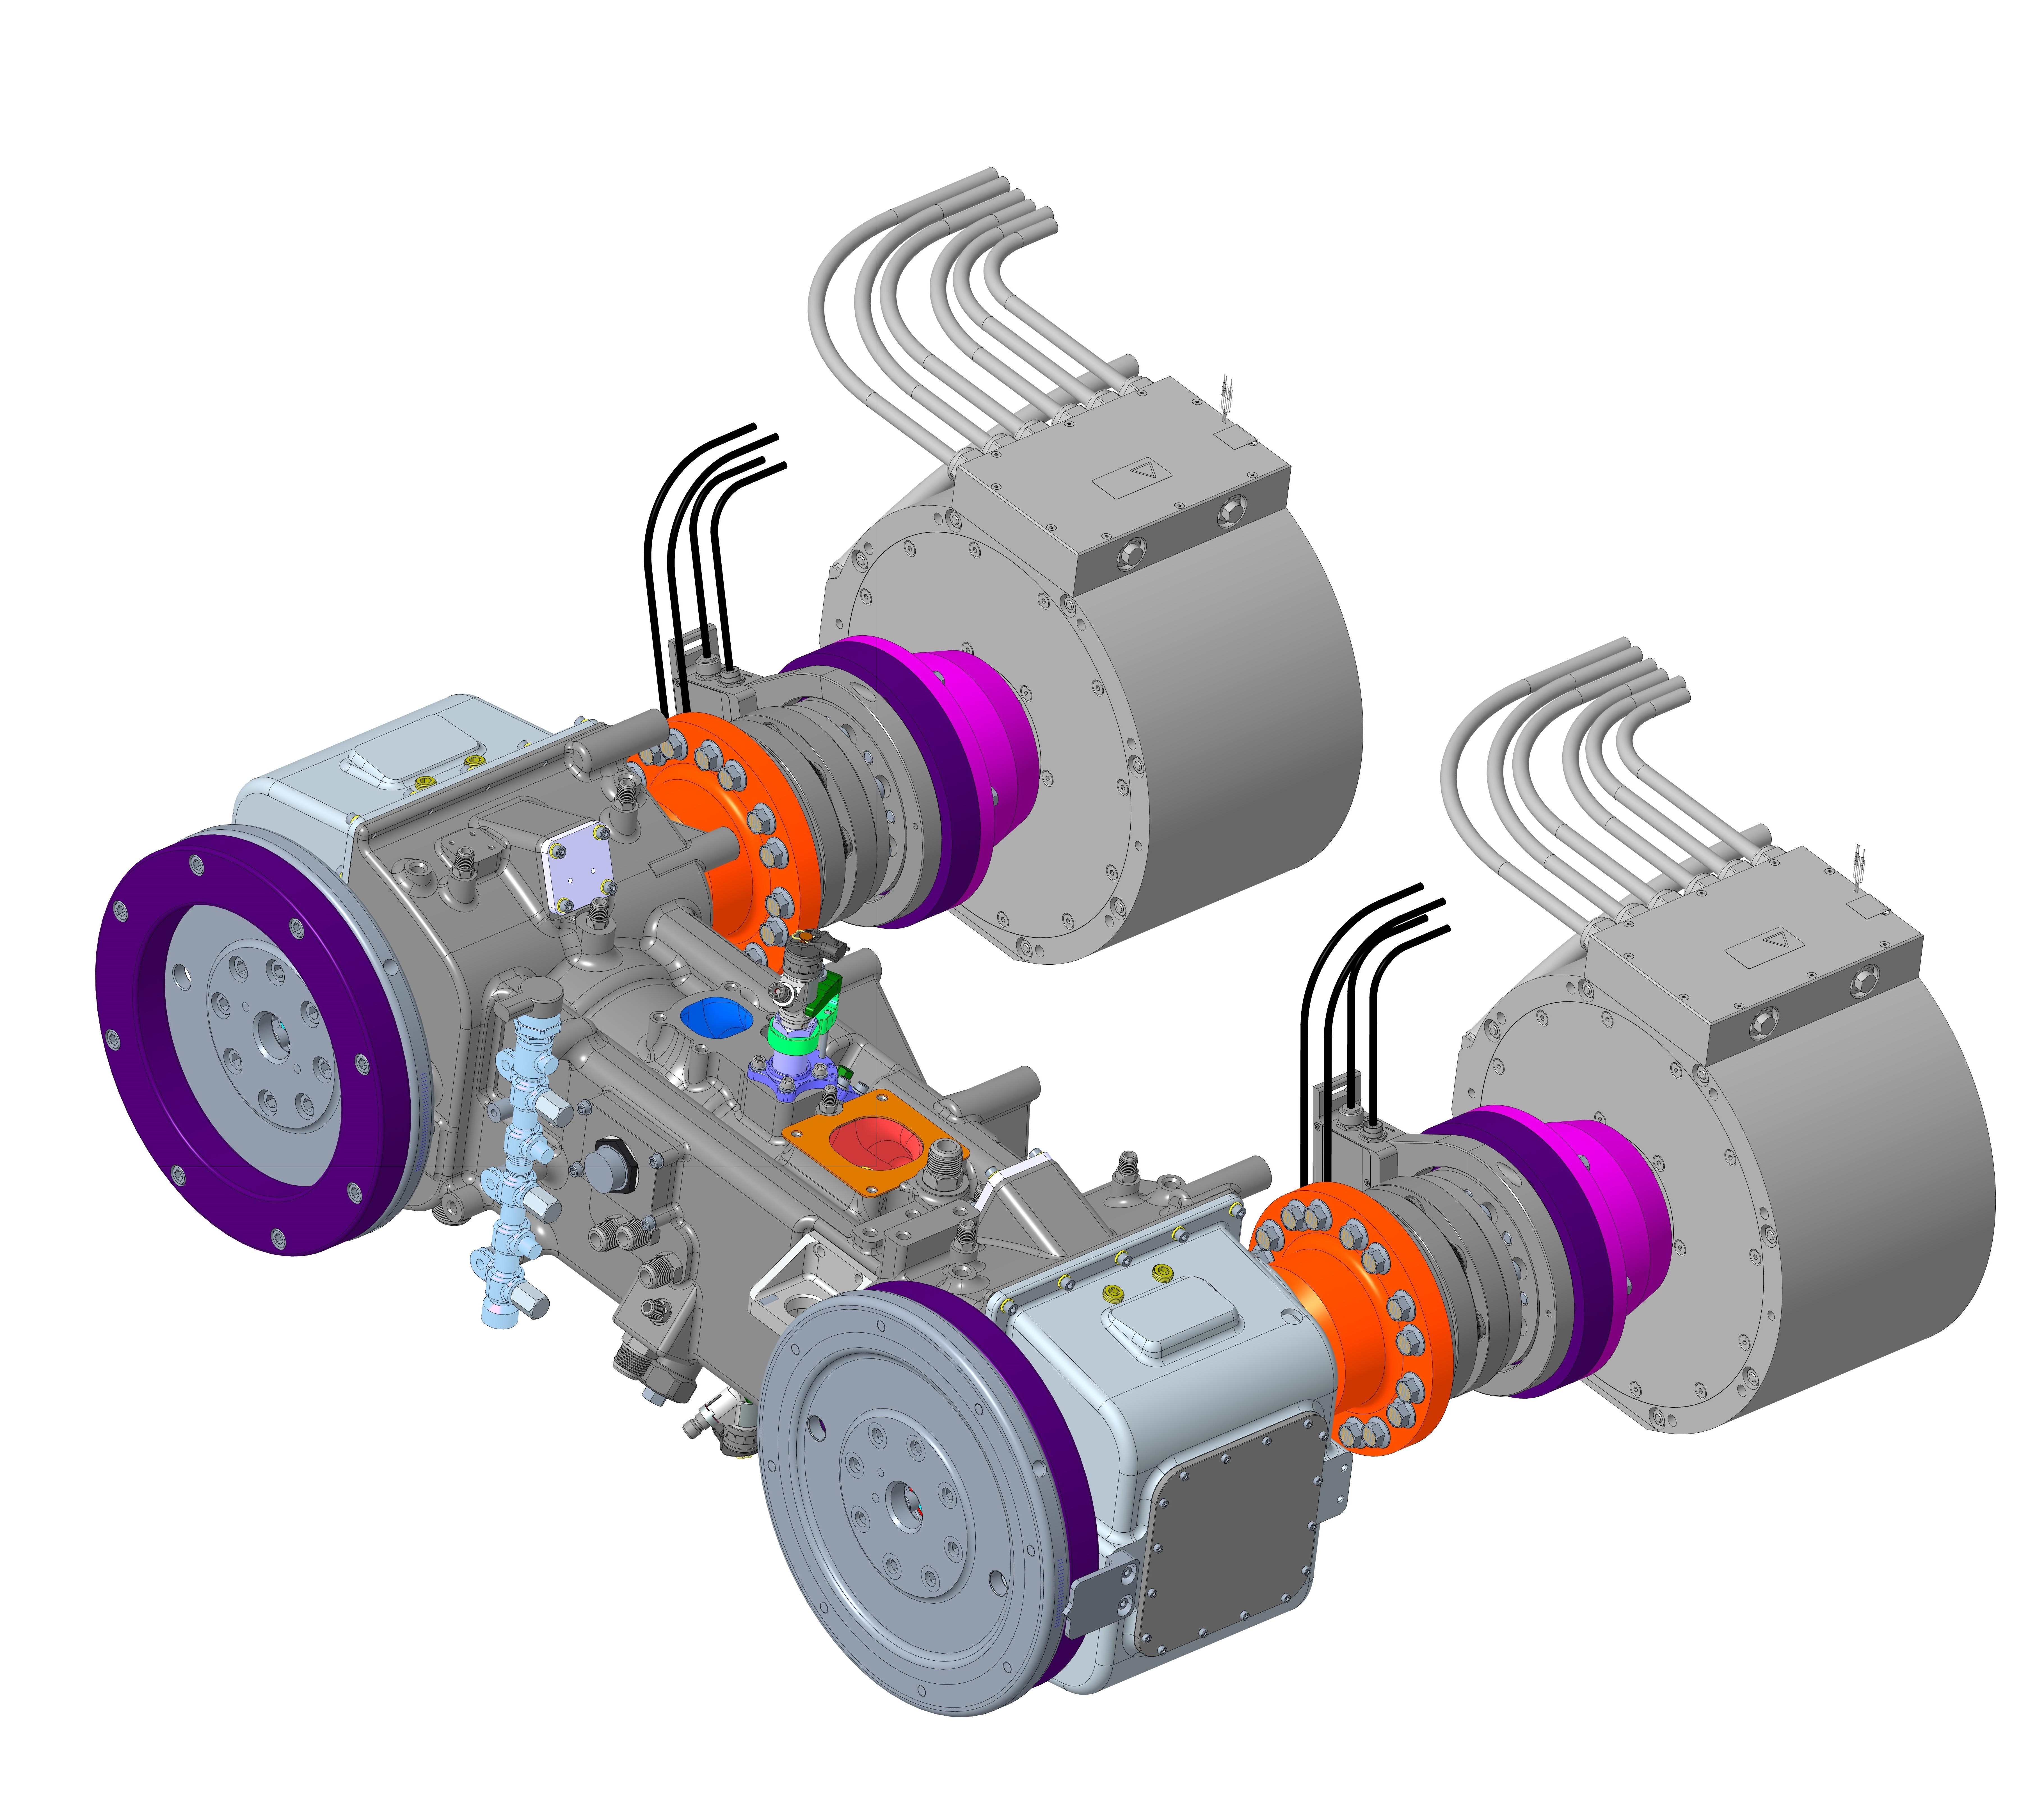 opposed piston engine configured in a series hybrid architecture